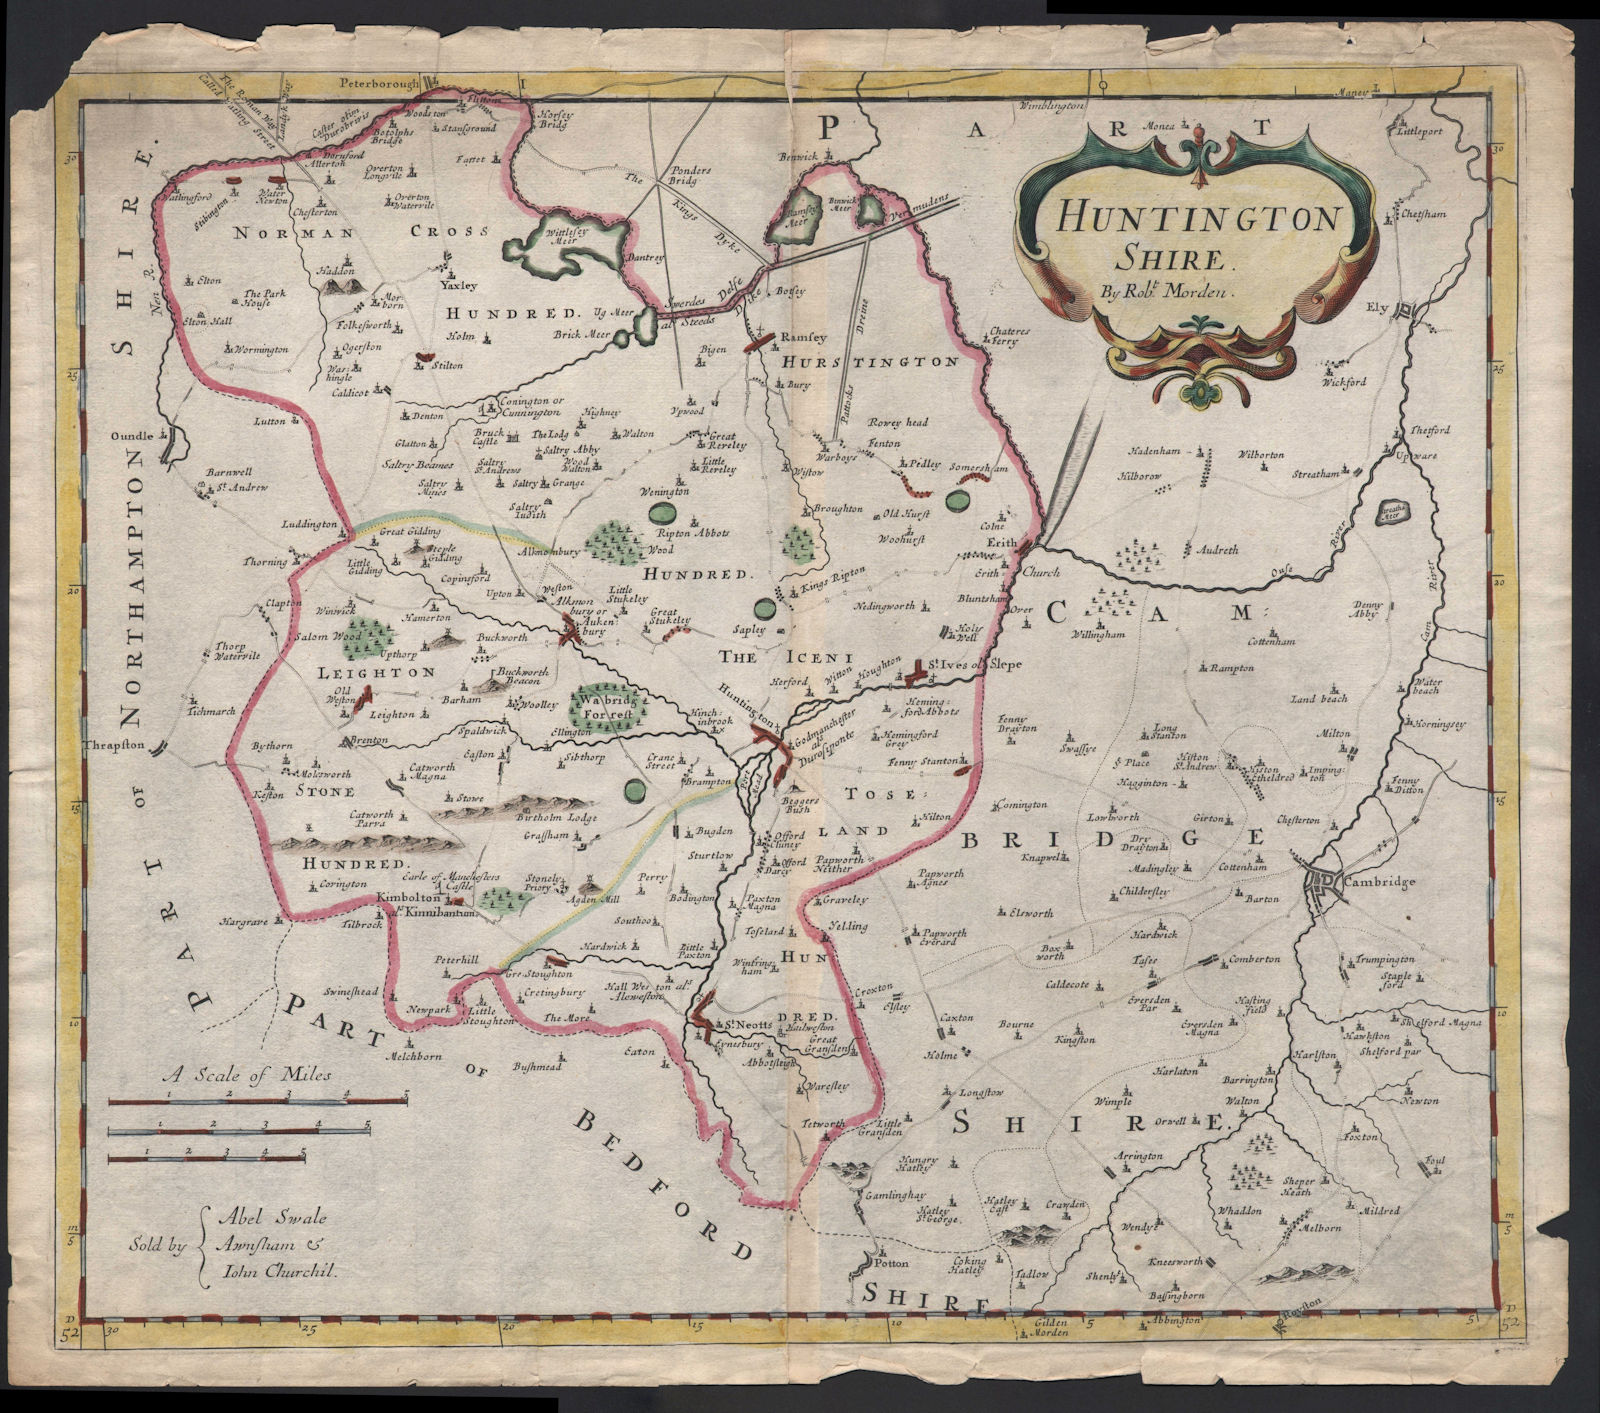 Huntingdonshire.'HUNTINGTON SHIRE' by ROBERT MORDEN. Coloured 1695 old map